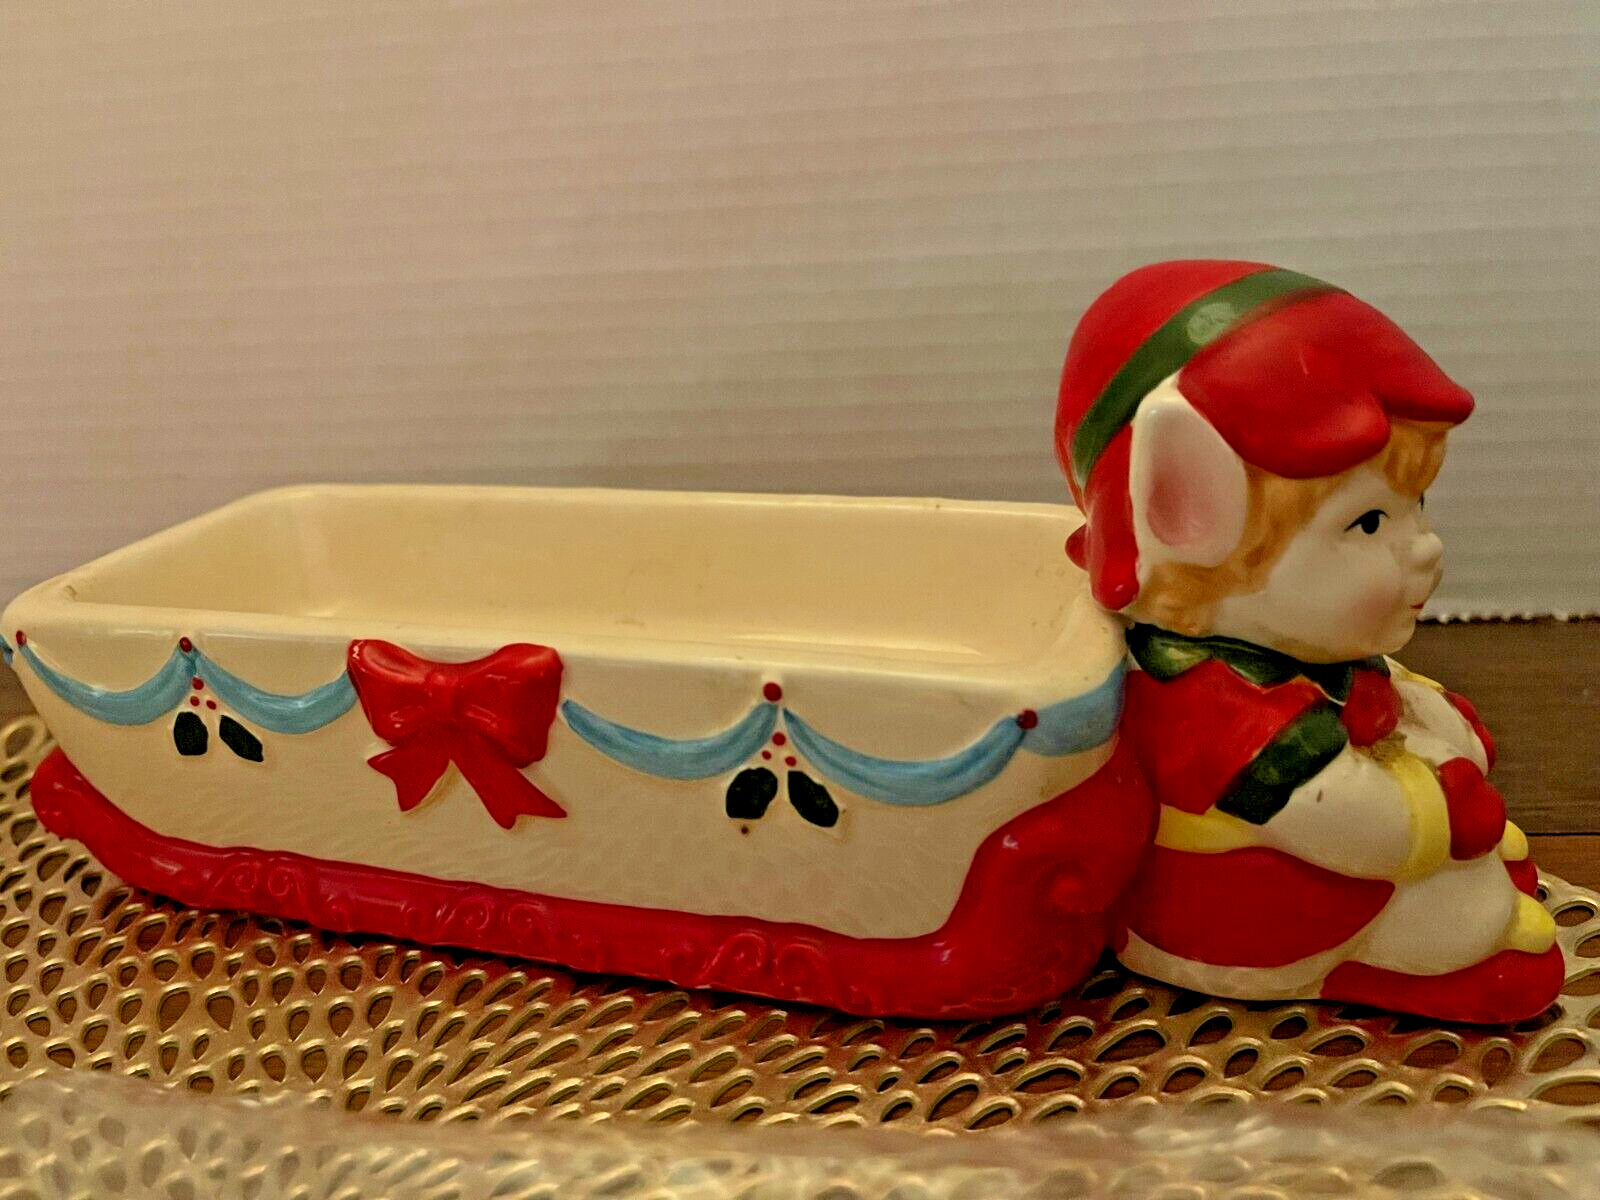 Vintage JSNY Christmas Elf Tray - Bright Colors No Box made in Taiwan